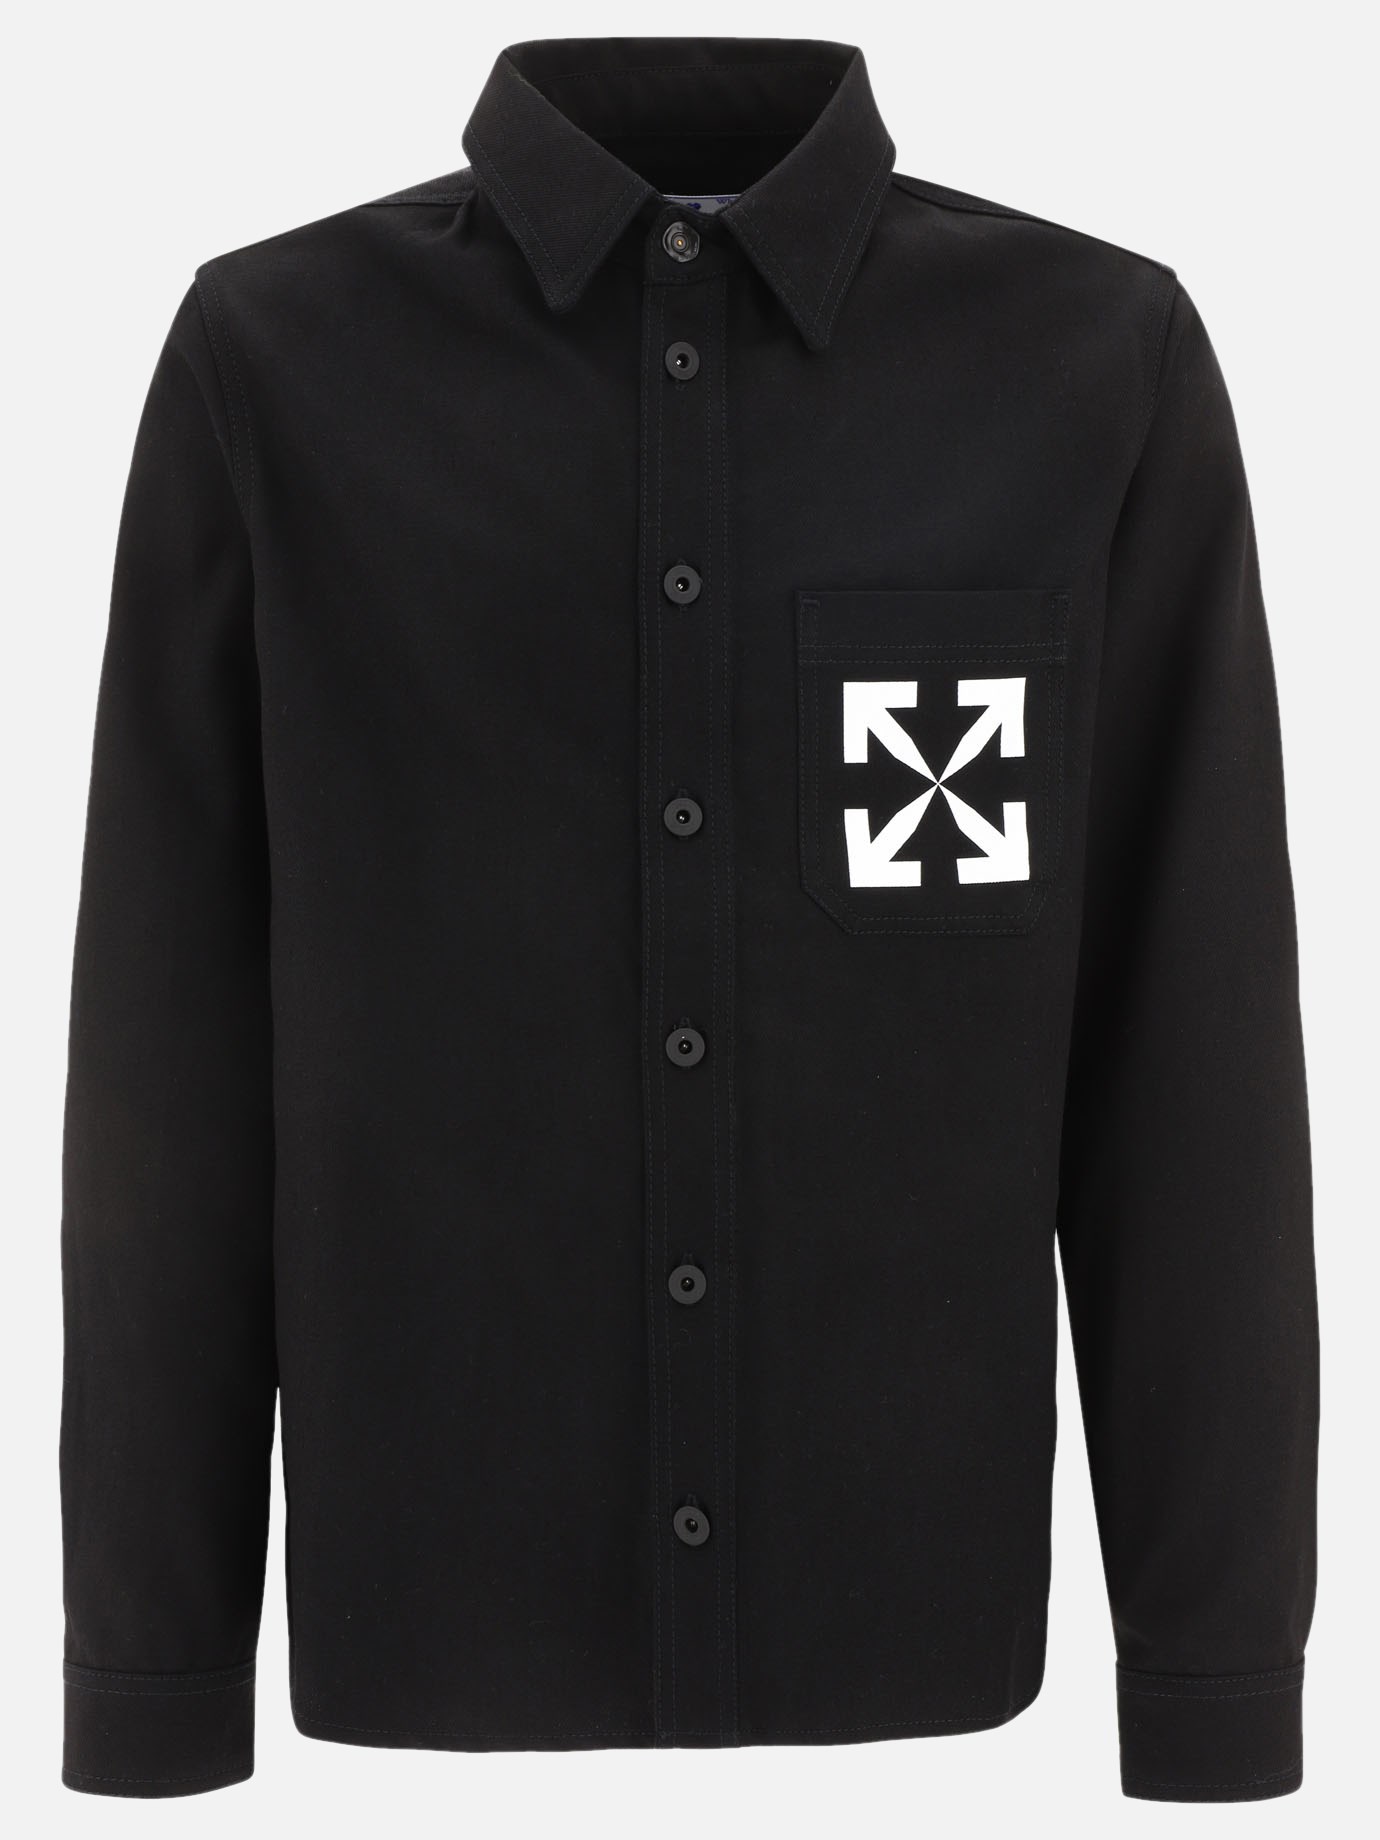 Overshirt  Single Arrow by Off-White - 2